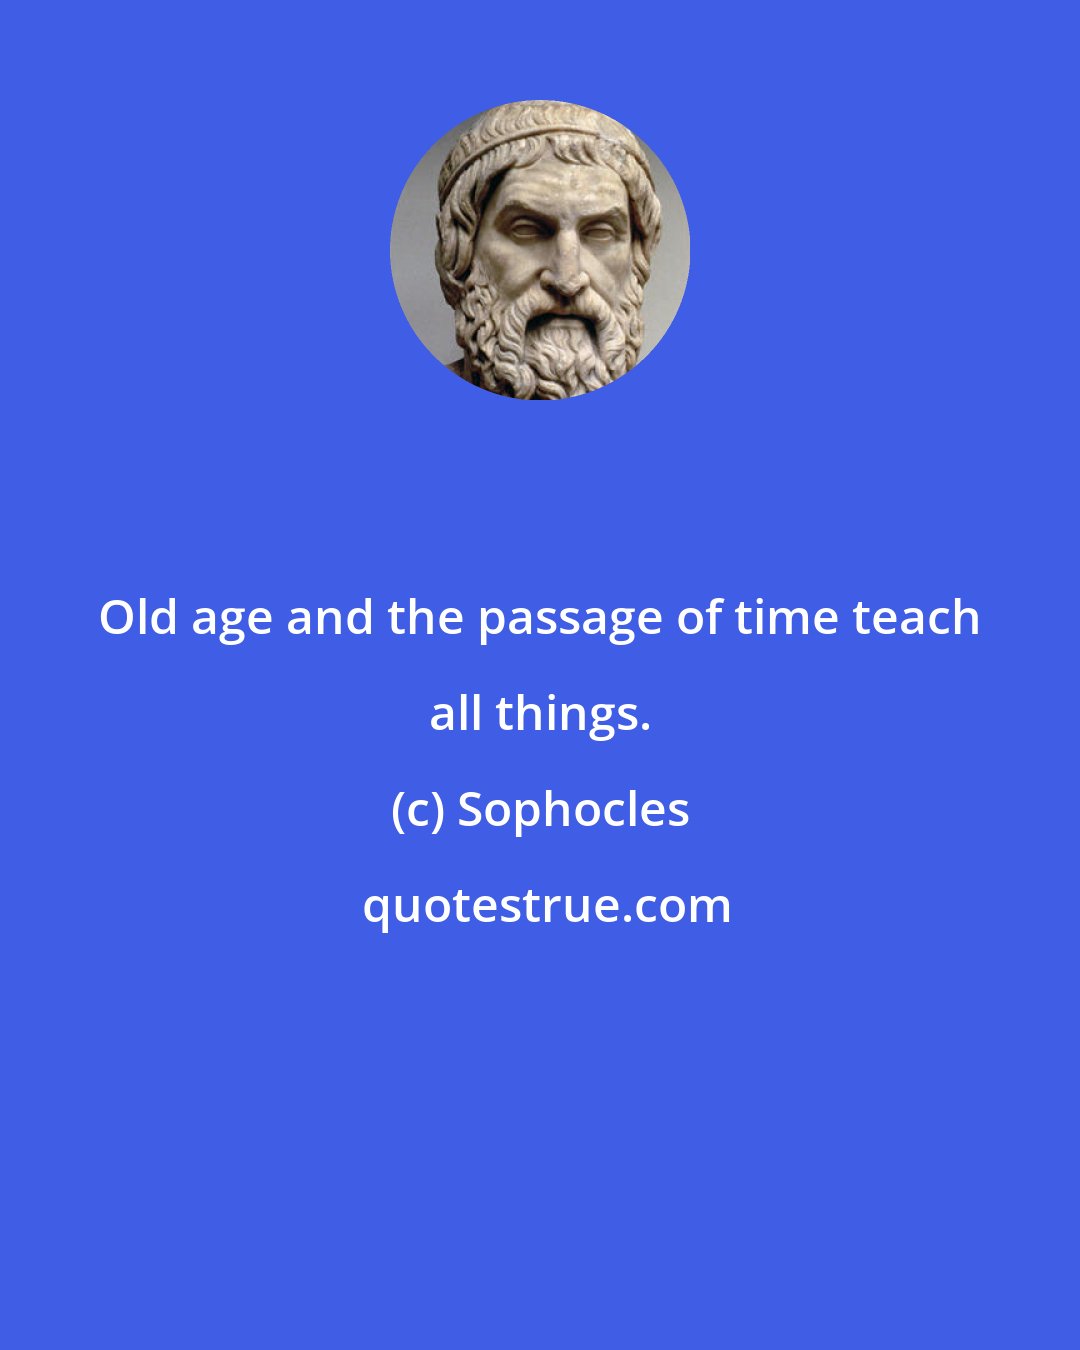 Sophocles: Old age and the passage of time teach all things.